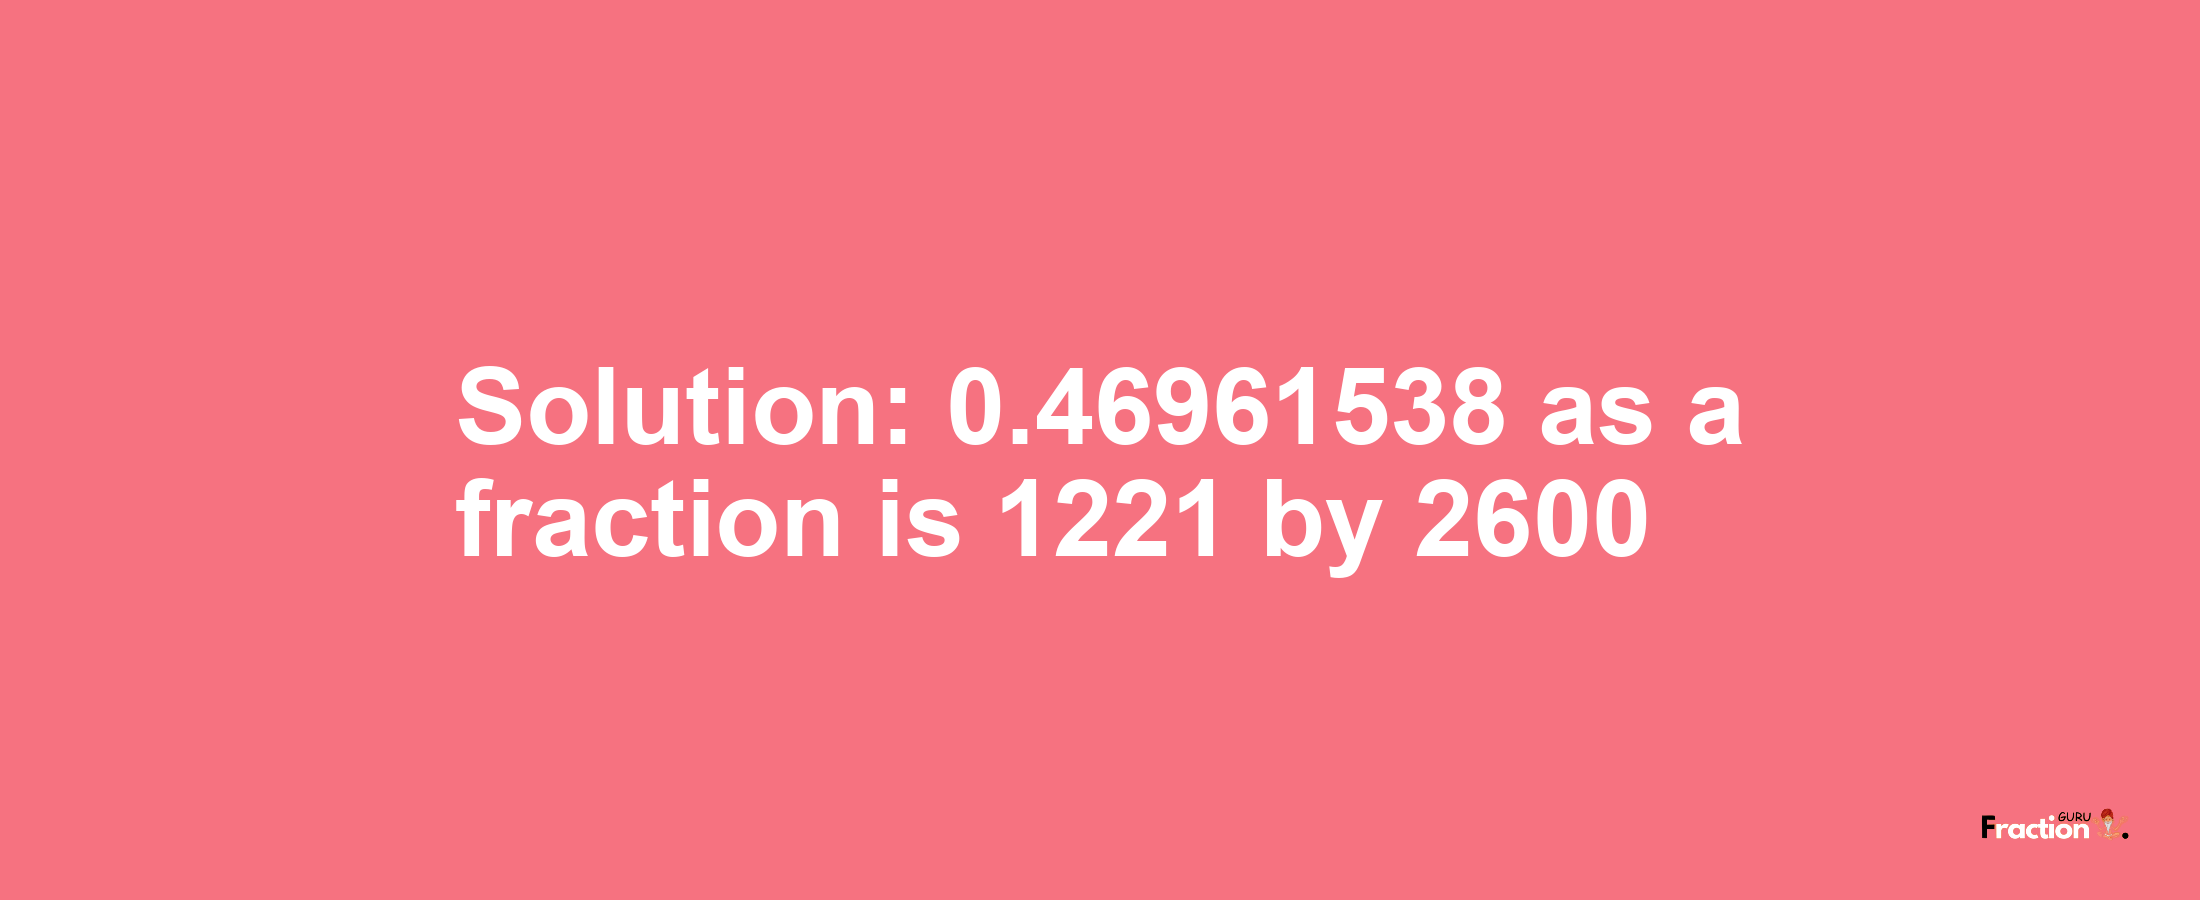 Solution:0.46961538 as a fraction is 1221/2600